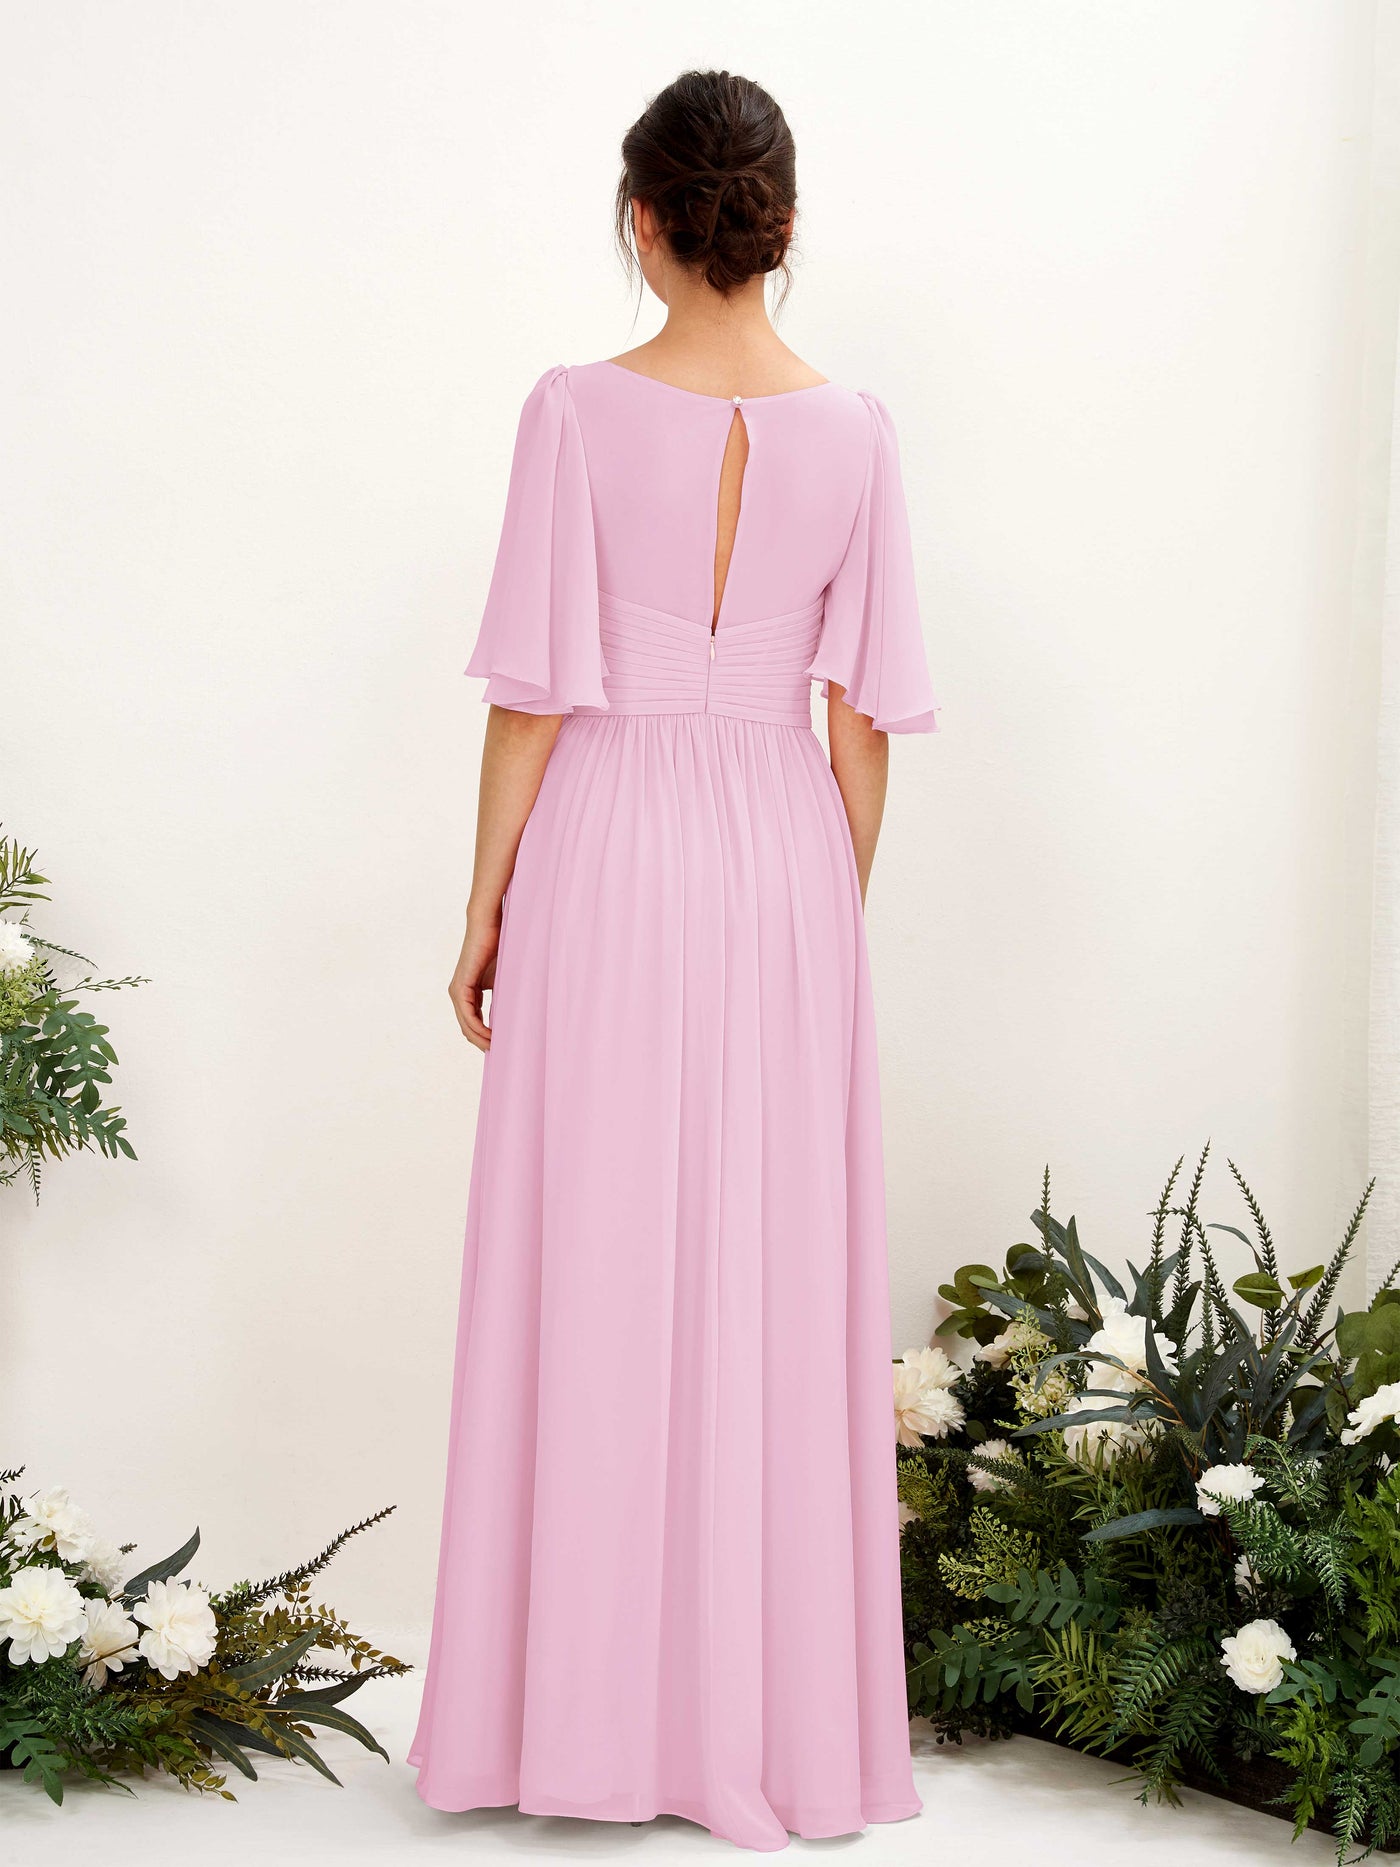 Candy Pink Bridesmaid Dresses Bridesmaid Dress A-line Chiffon V-neck Full Length 1/2 Sleeves Wedding Party Dress (81221639)#color_candy-pink